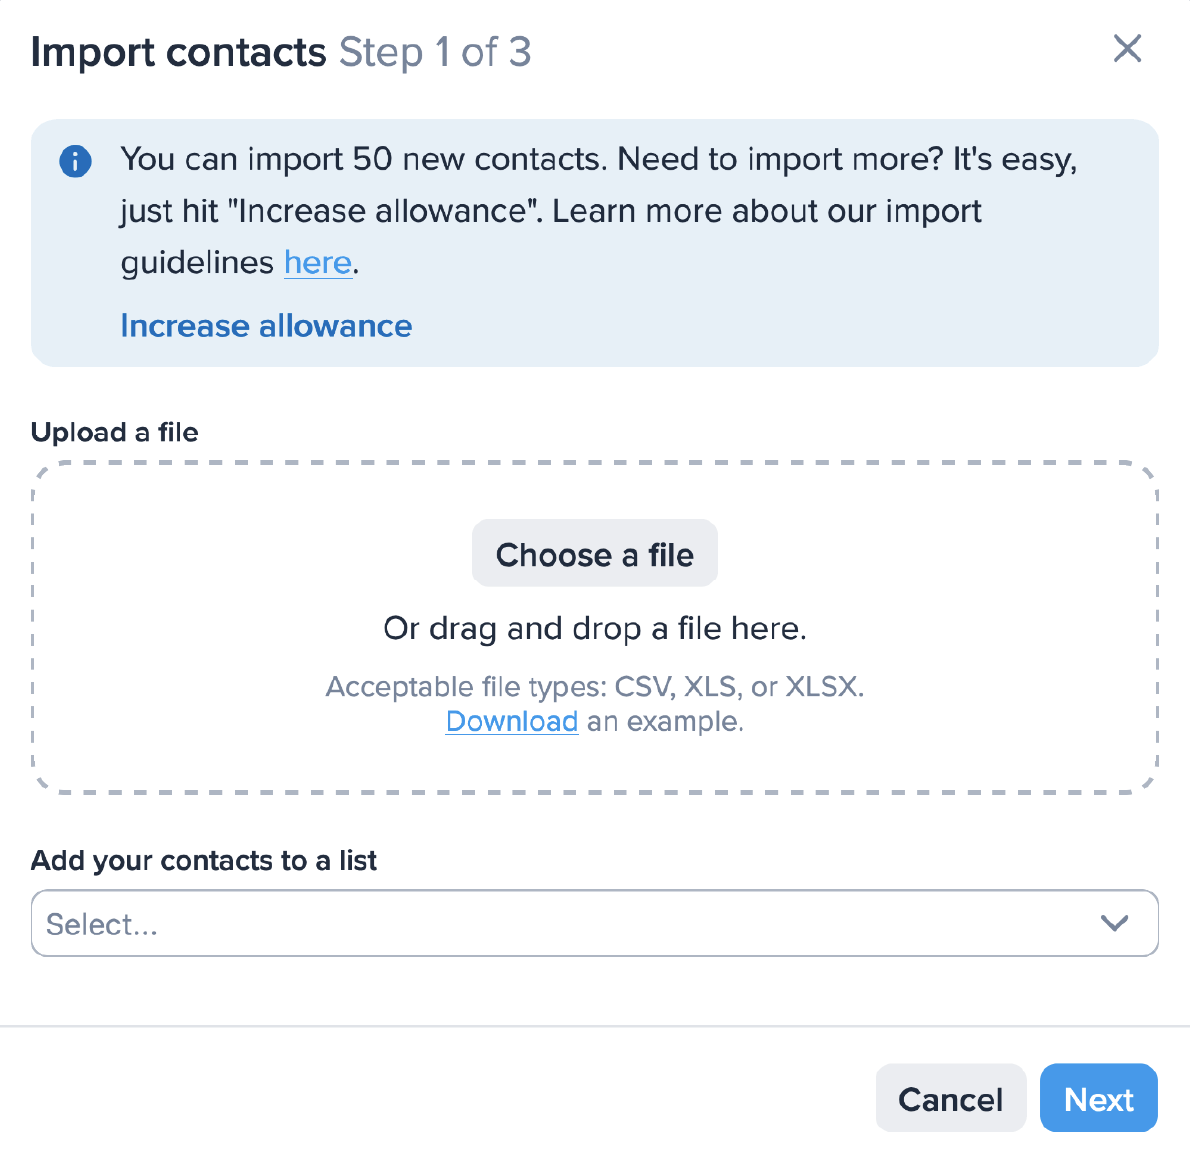 importing contacts into SimpleTexting for a personalized SMS campaign